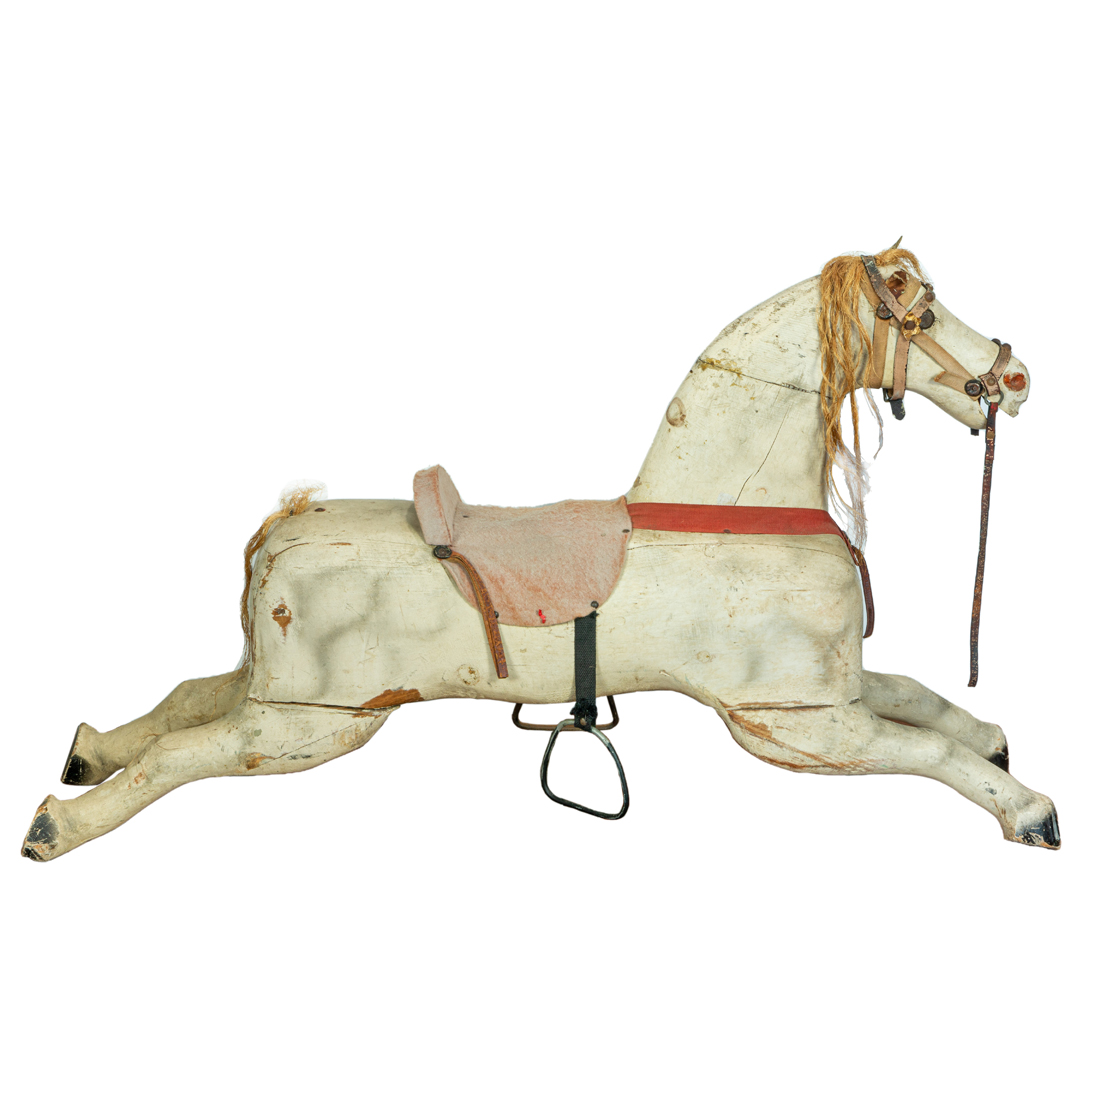 A CHILDRENS HOBBY HORSE A childrens